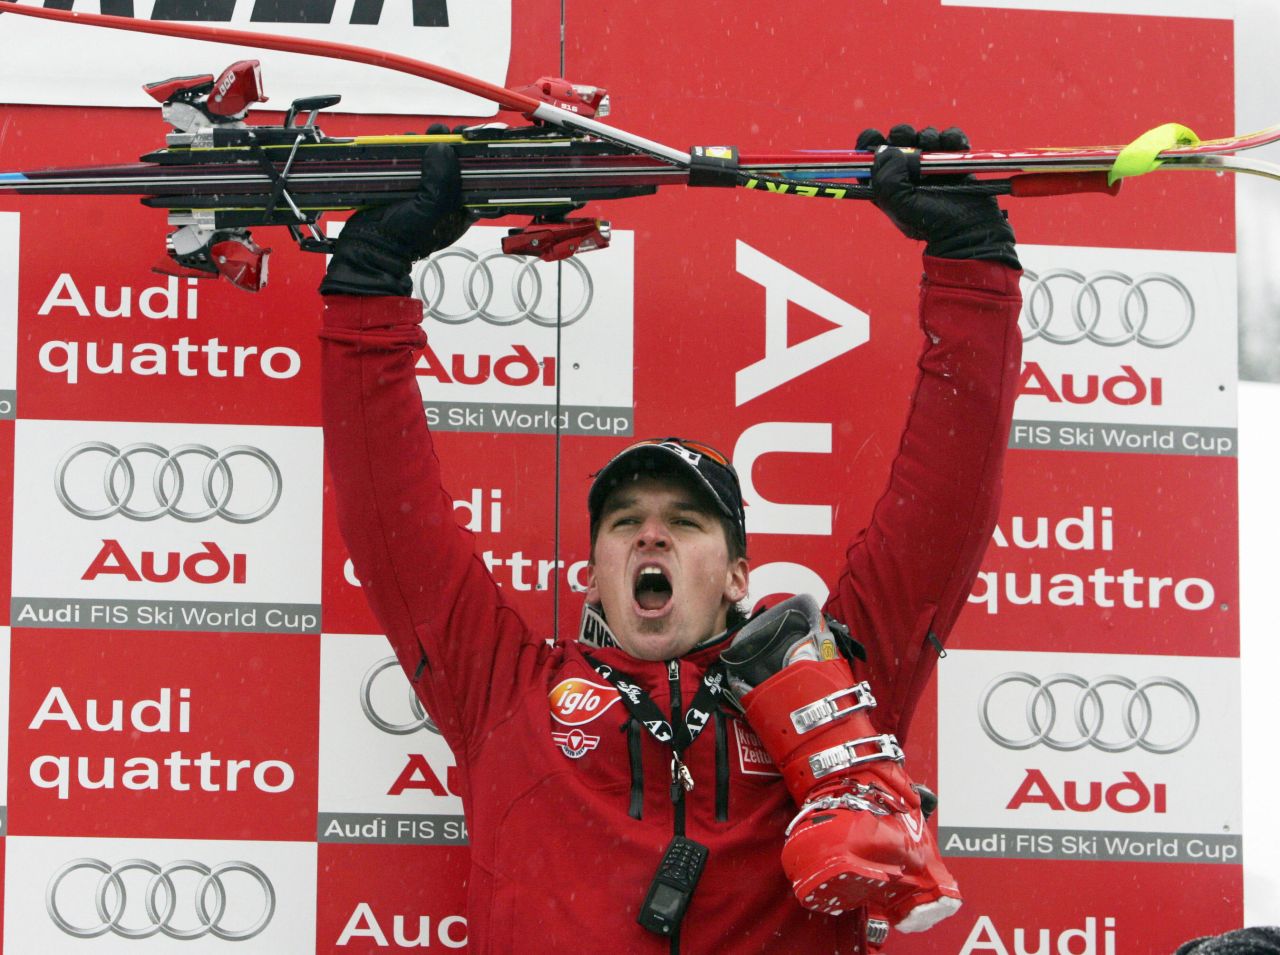 Matthias Lanzinger celebrates the best result of his skiing career, a podium finish at the Super-G in Beaver Creek, Colorado, back in December 2005.